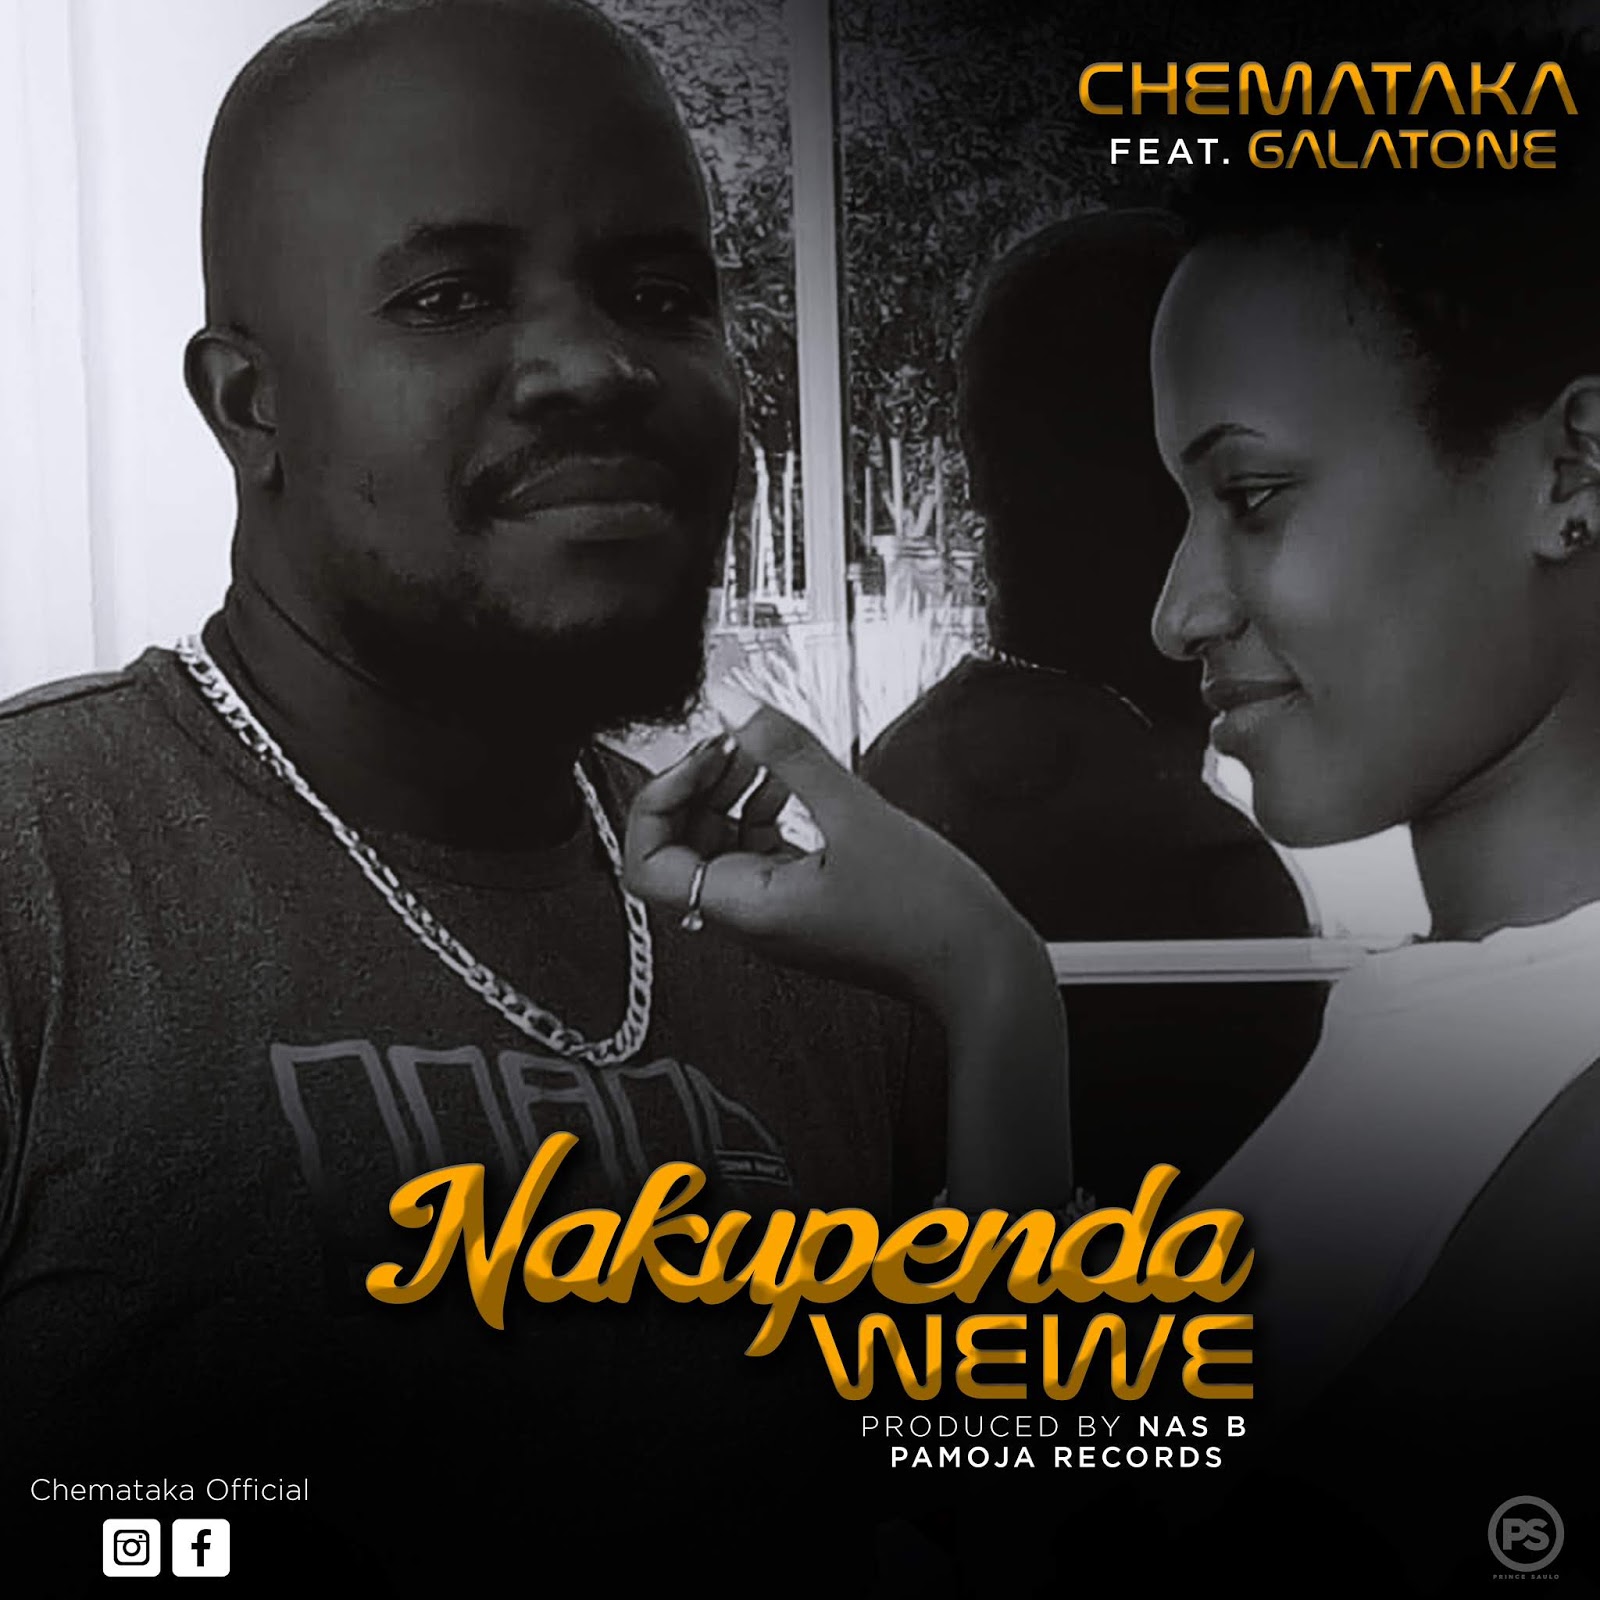 AUDIO&VIDEO | Chemataka Ft. Galatone – Nakupenda Wewe<br />
<b>Deprecated</b>:  strip_tags(): Passing null to parameter #1 ($string) of type string is deprecated in <b>/home/djmwanga/public_html/wp-content/themes/Newsmag/loop-single.php</b> on line <b>60</b><br />
